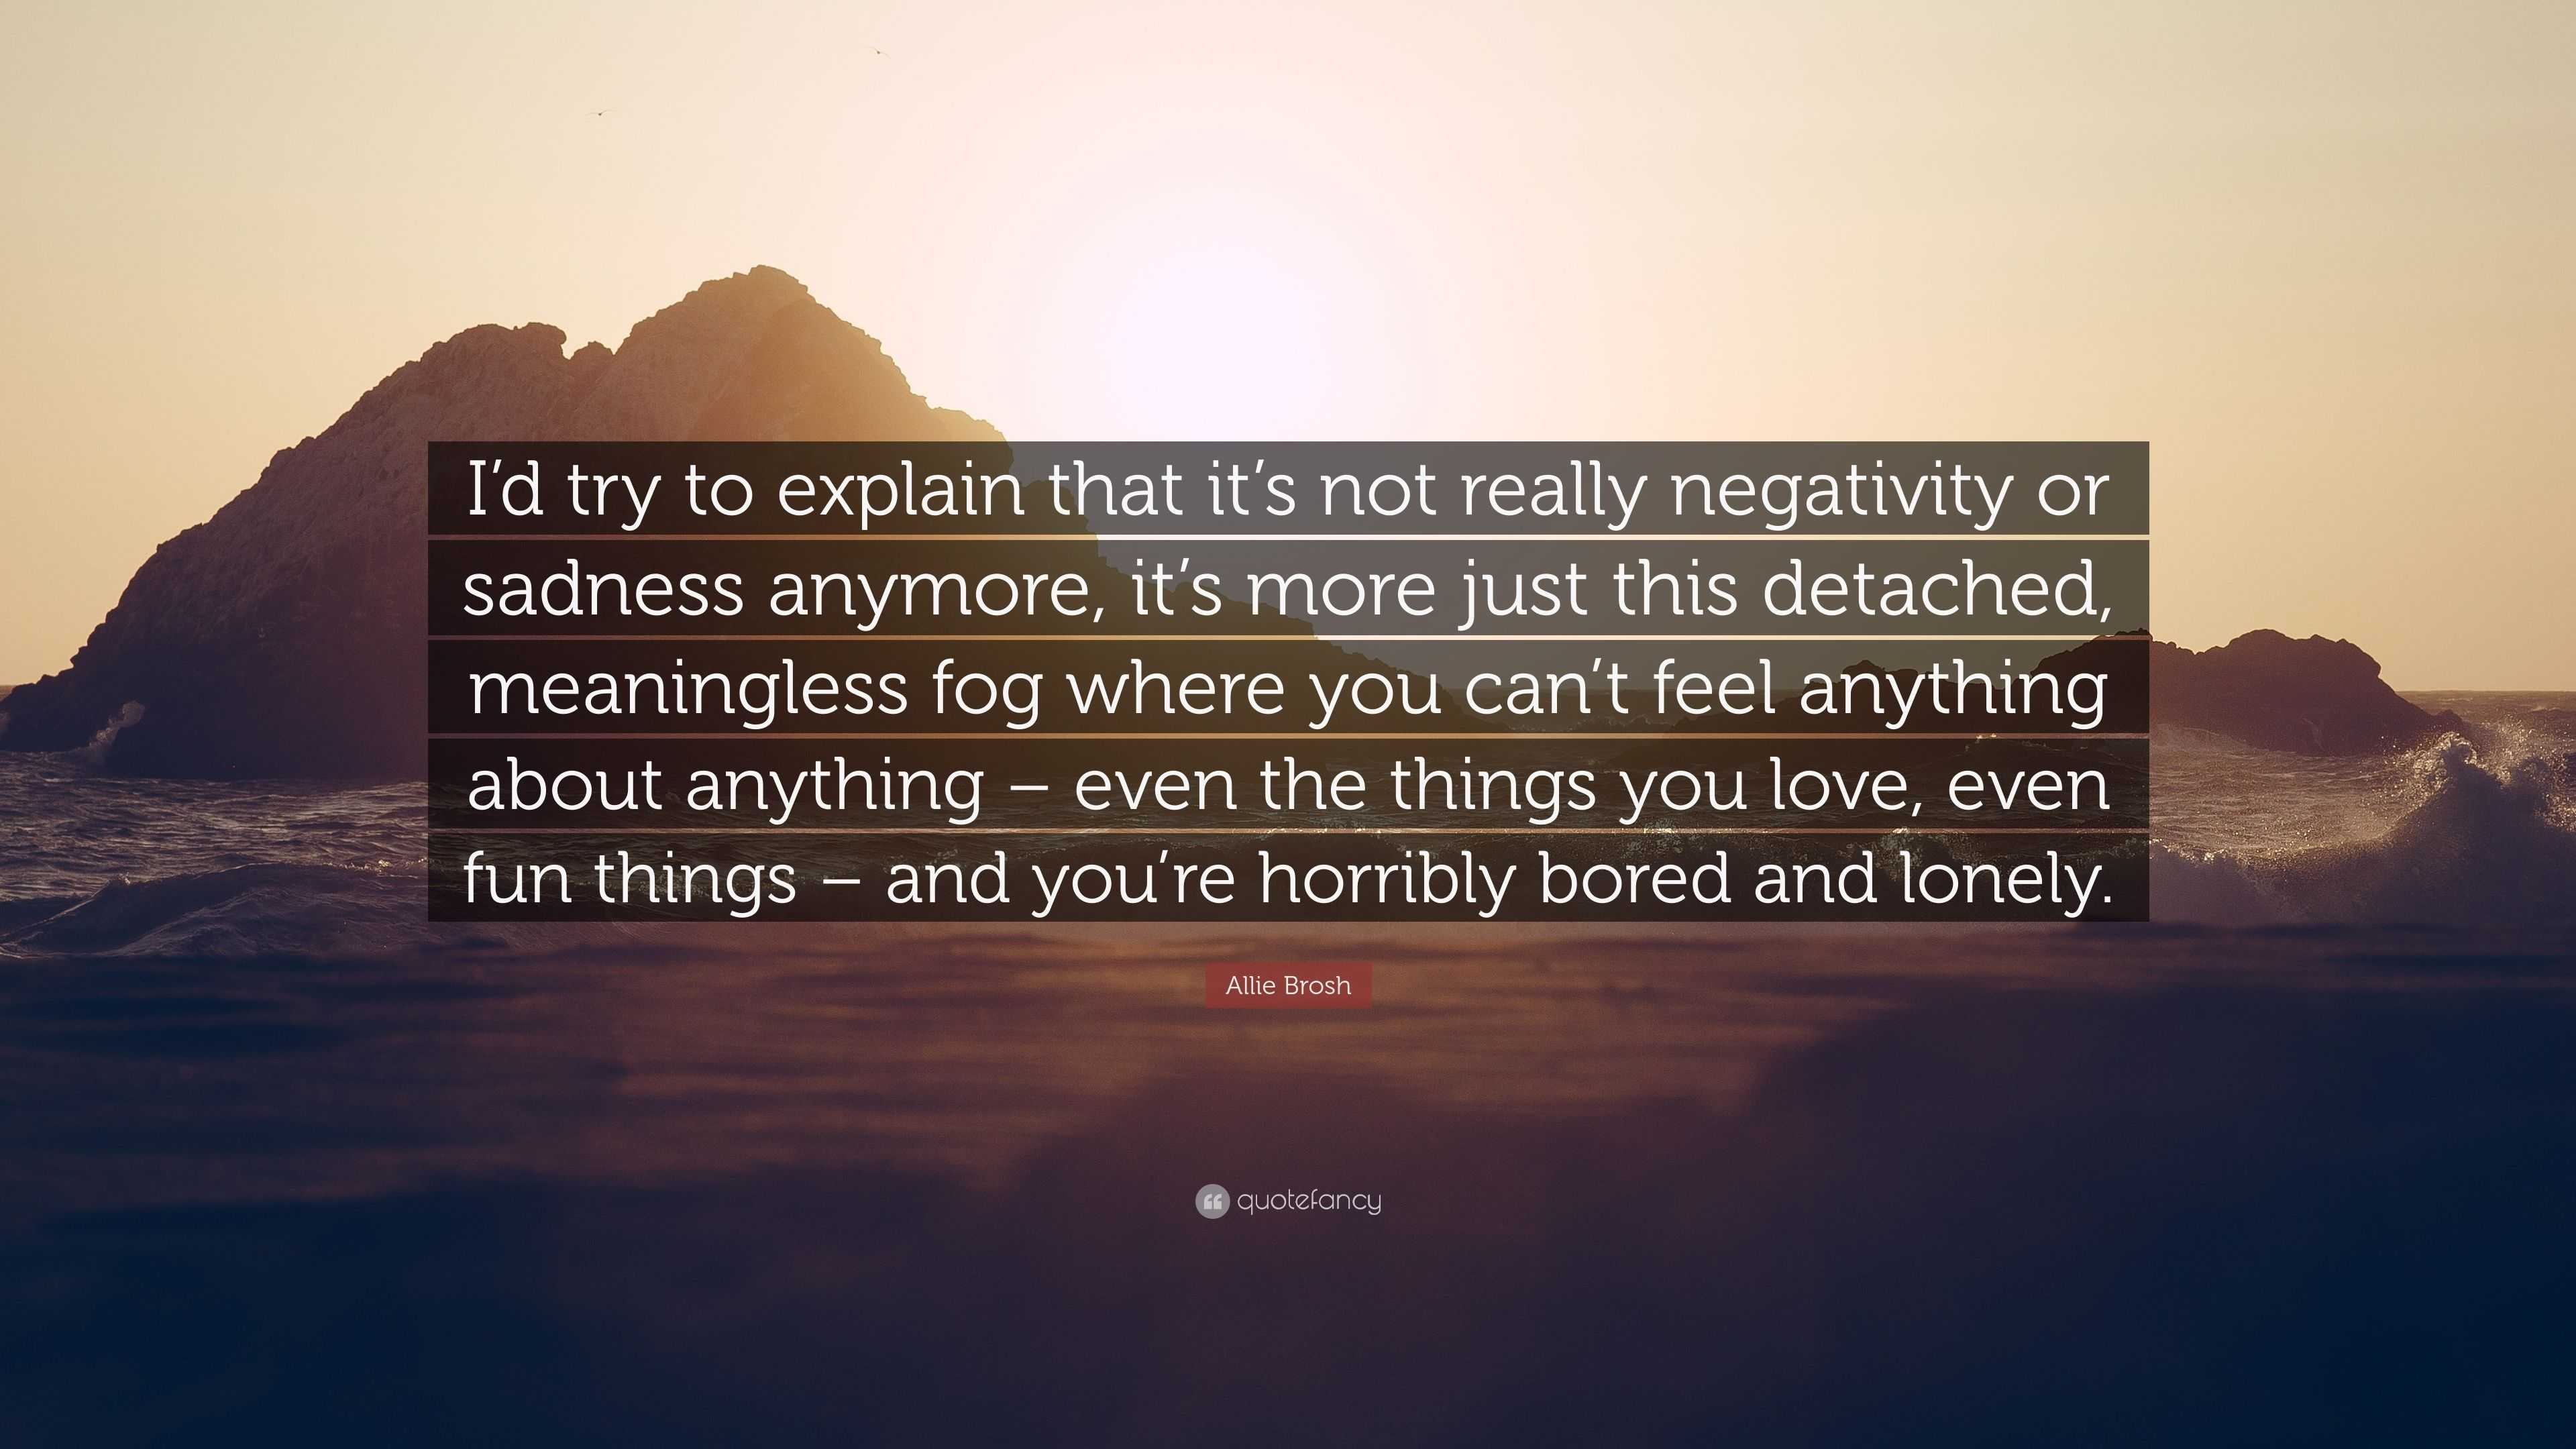 Allie Brosh Quote: “I’d try to explain that it’s not really negativity ...